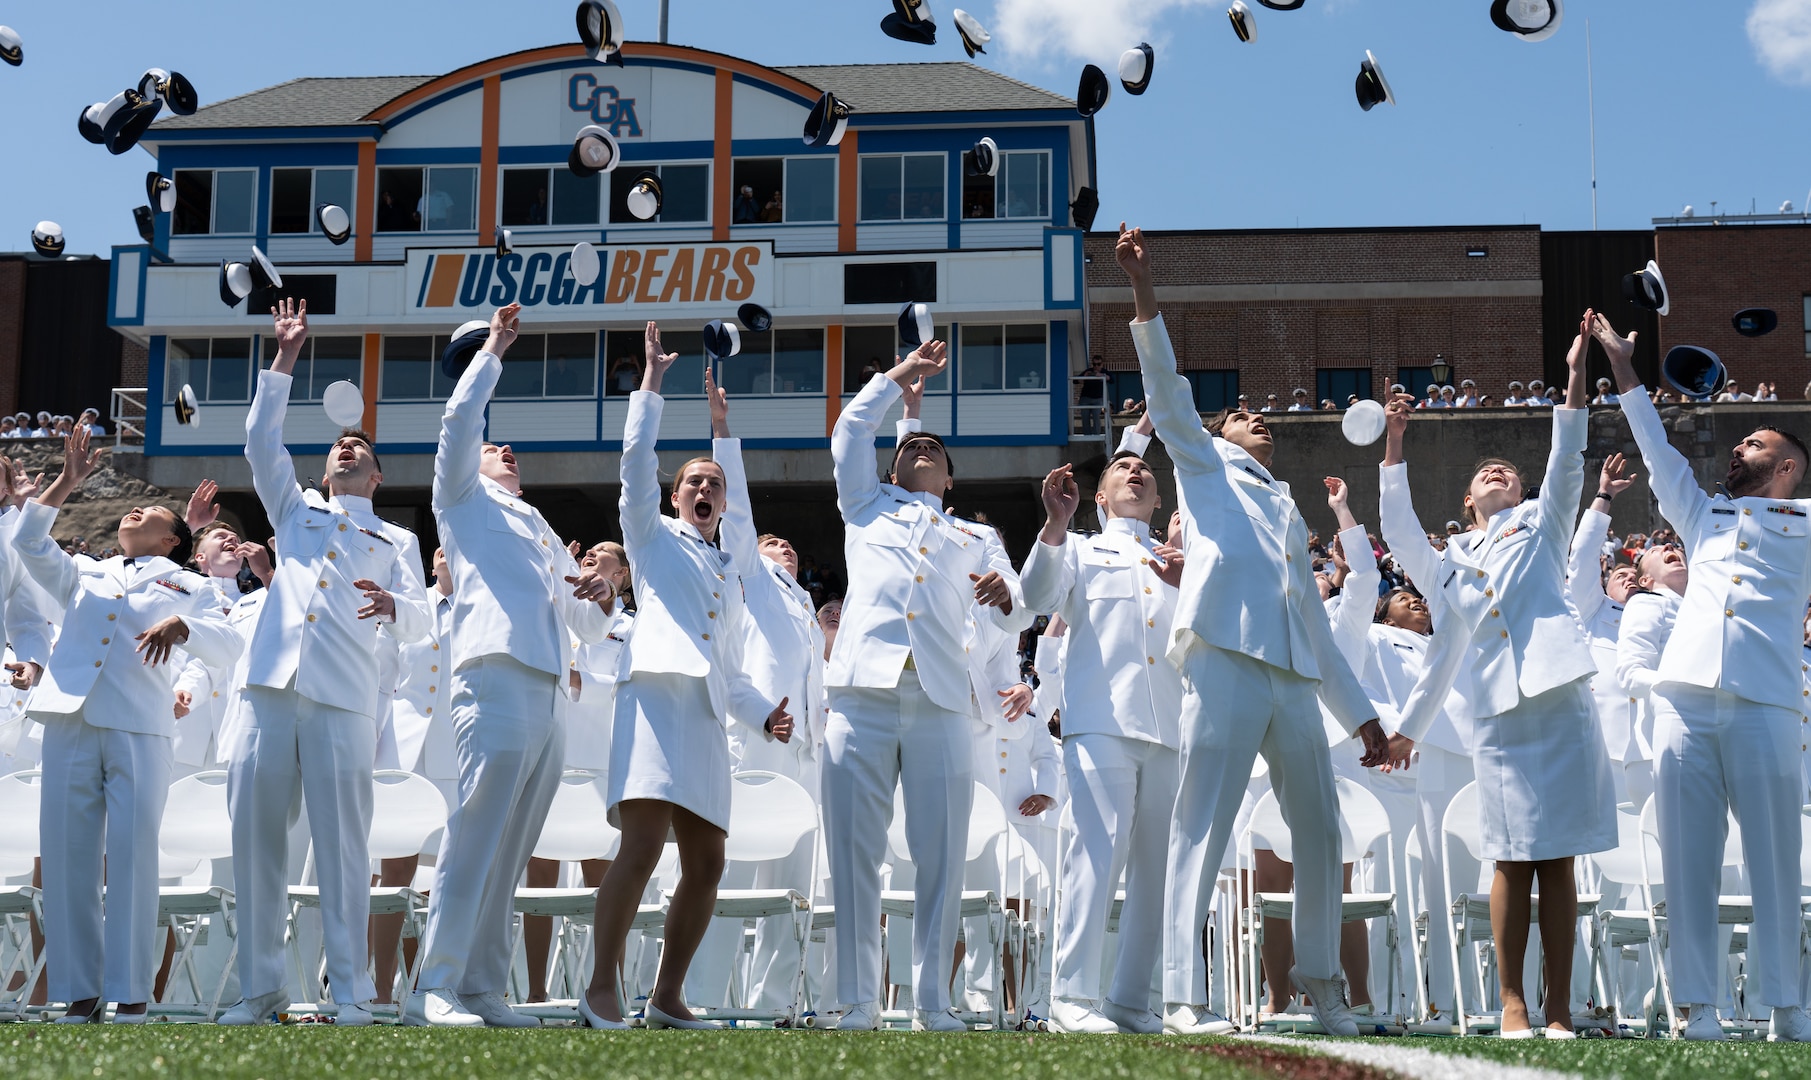 Secretary of Homeland Security Alejandro Mayorkas delivered the keynote address at the Coast Guard Academy during the 142nd Commencement Exercises May 17, 2023. The Coast Guard Academy commissioned 235 new officers. (U.S. Coast Guard photo by Petty Officer 2nd Class Matthew Abban)